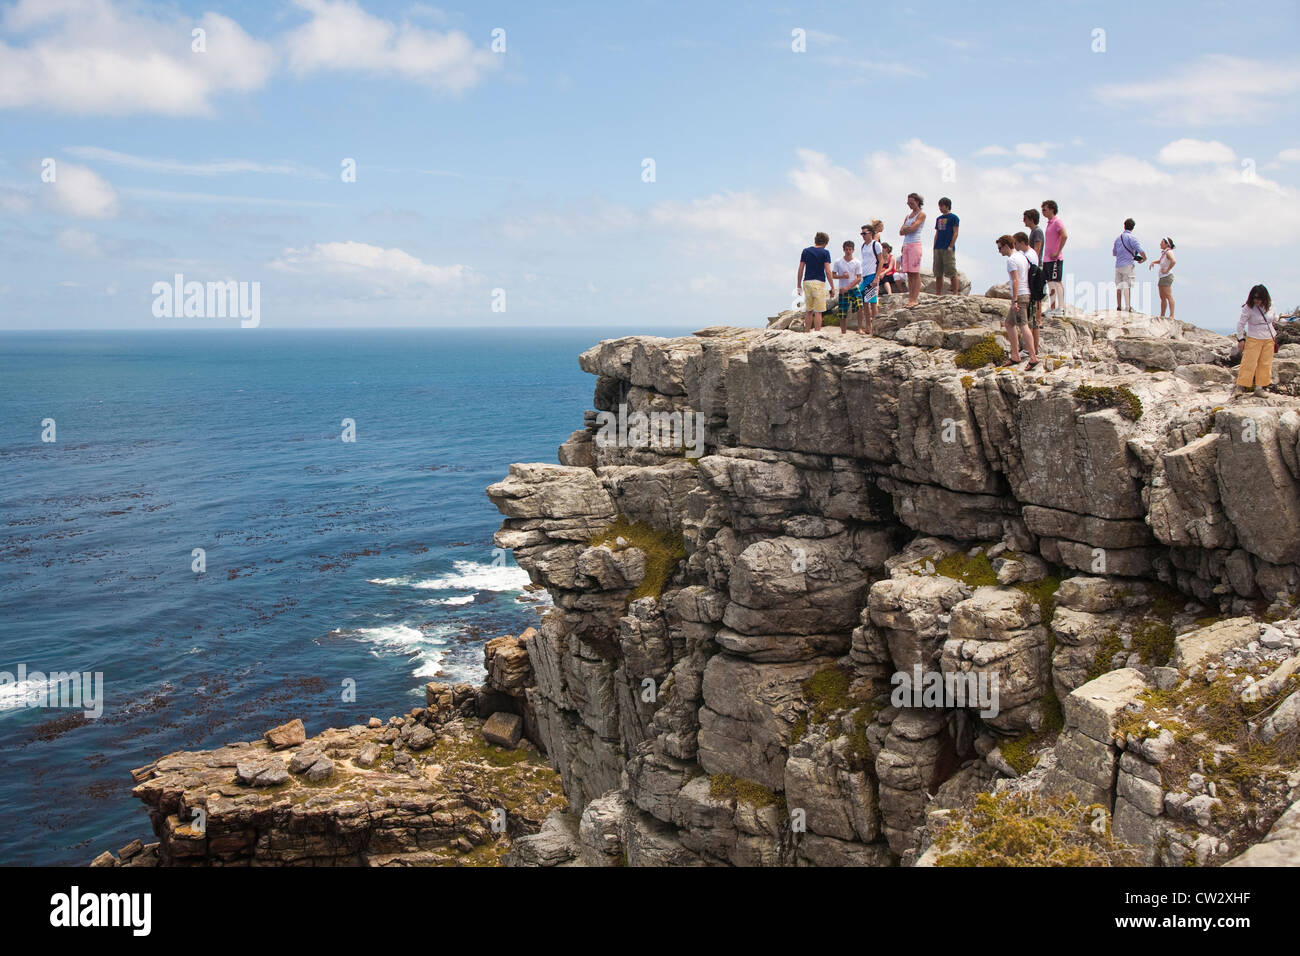 Tourists stand on the rocky coastline at The Cape of Good Hope, Table Mountain National Reserve, Cape Peninsula, South Africa Stock Photo